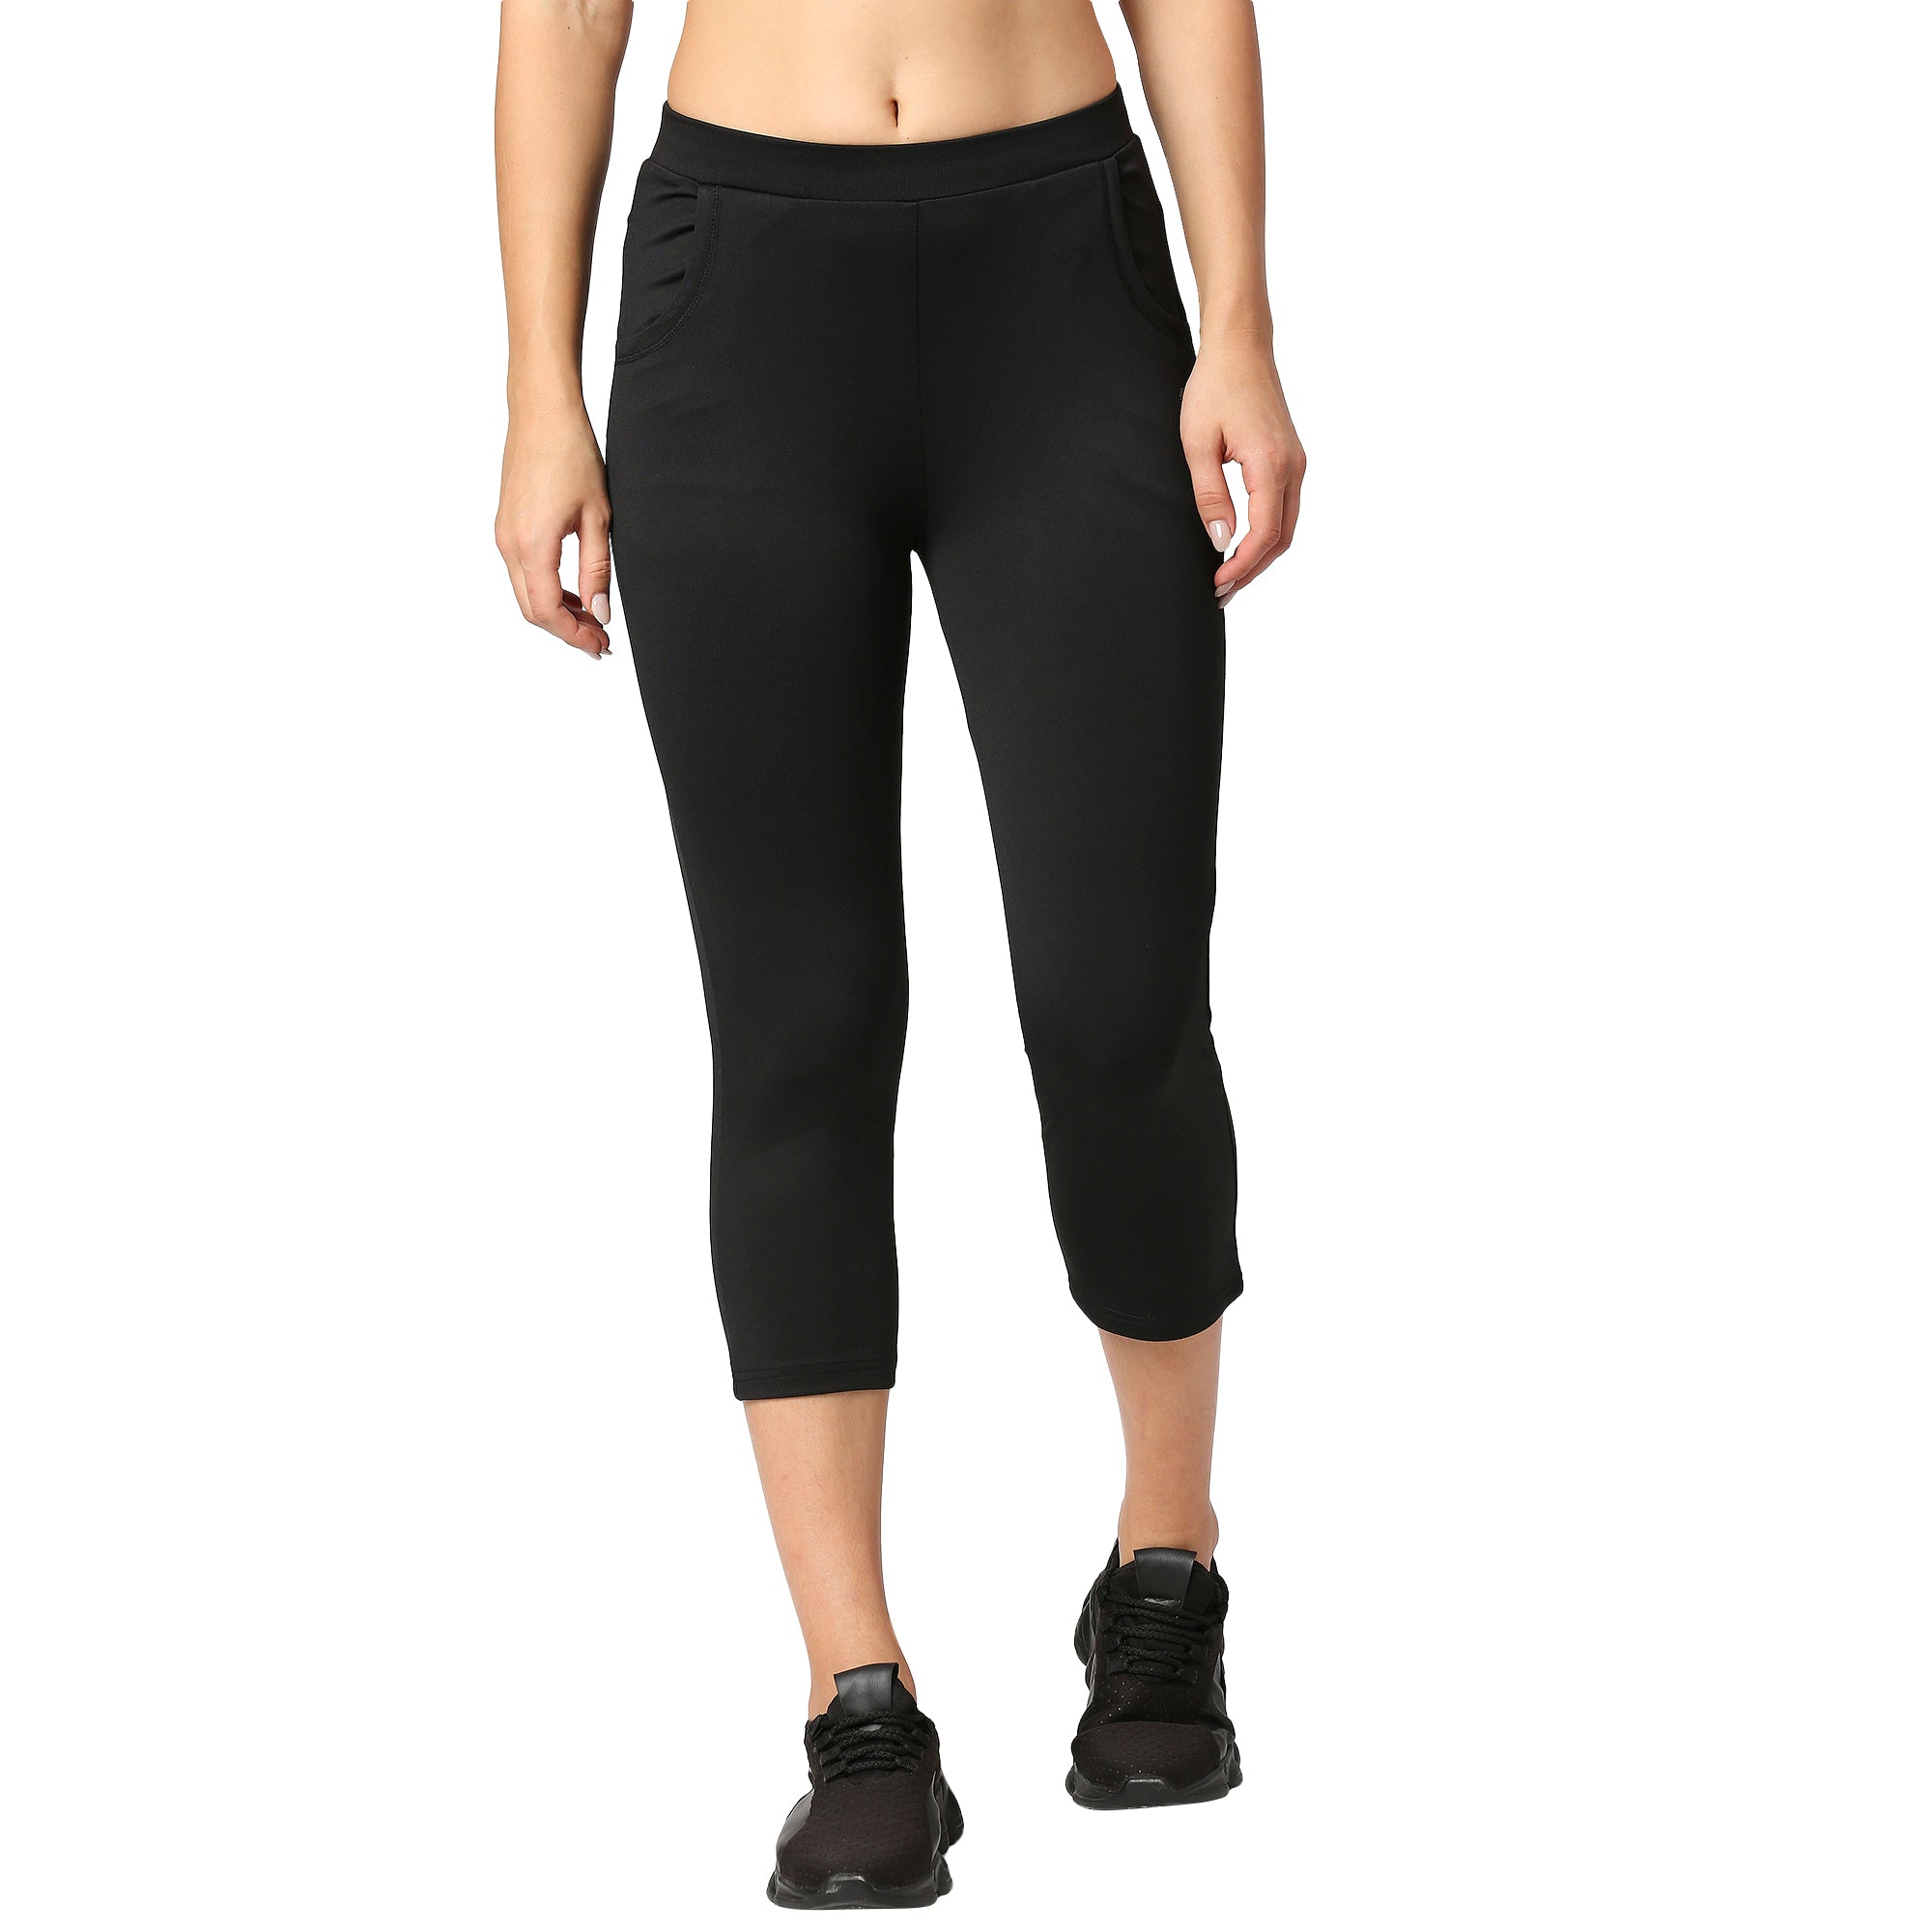 Buy Pro Gym Compression Capri Leggings  Tights for Running Yoga Working  Out  High Waisted Body Slimming Pants Women Black Capri Online at Best  Prices in India  Flipkartcom